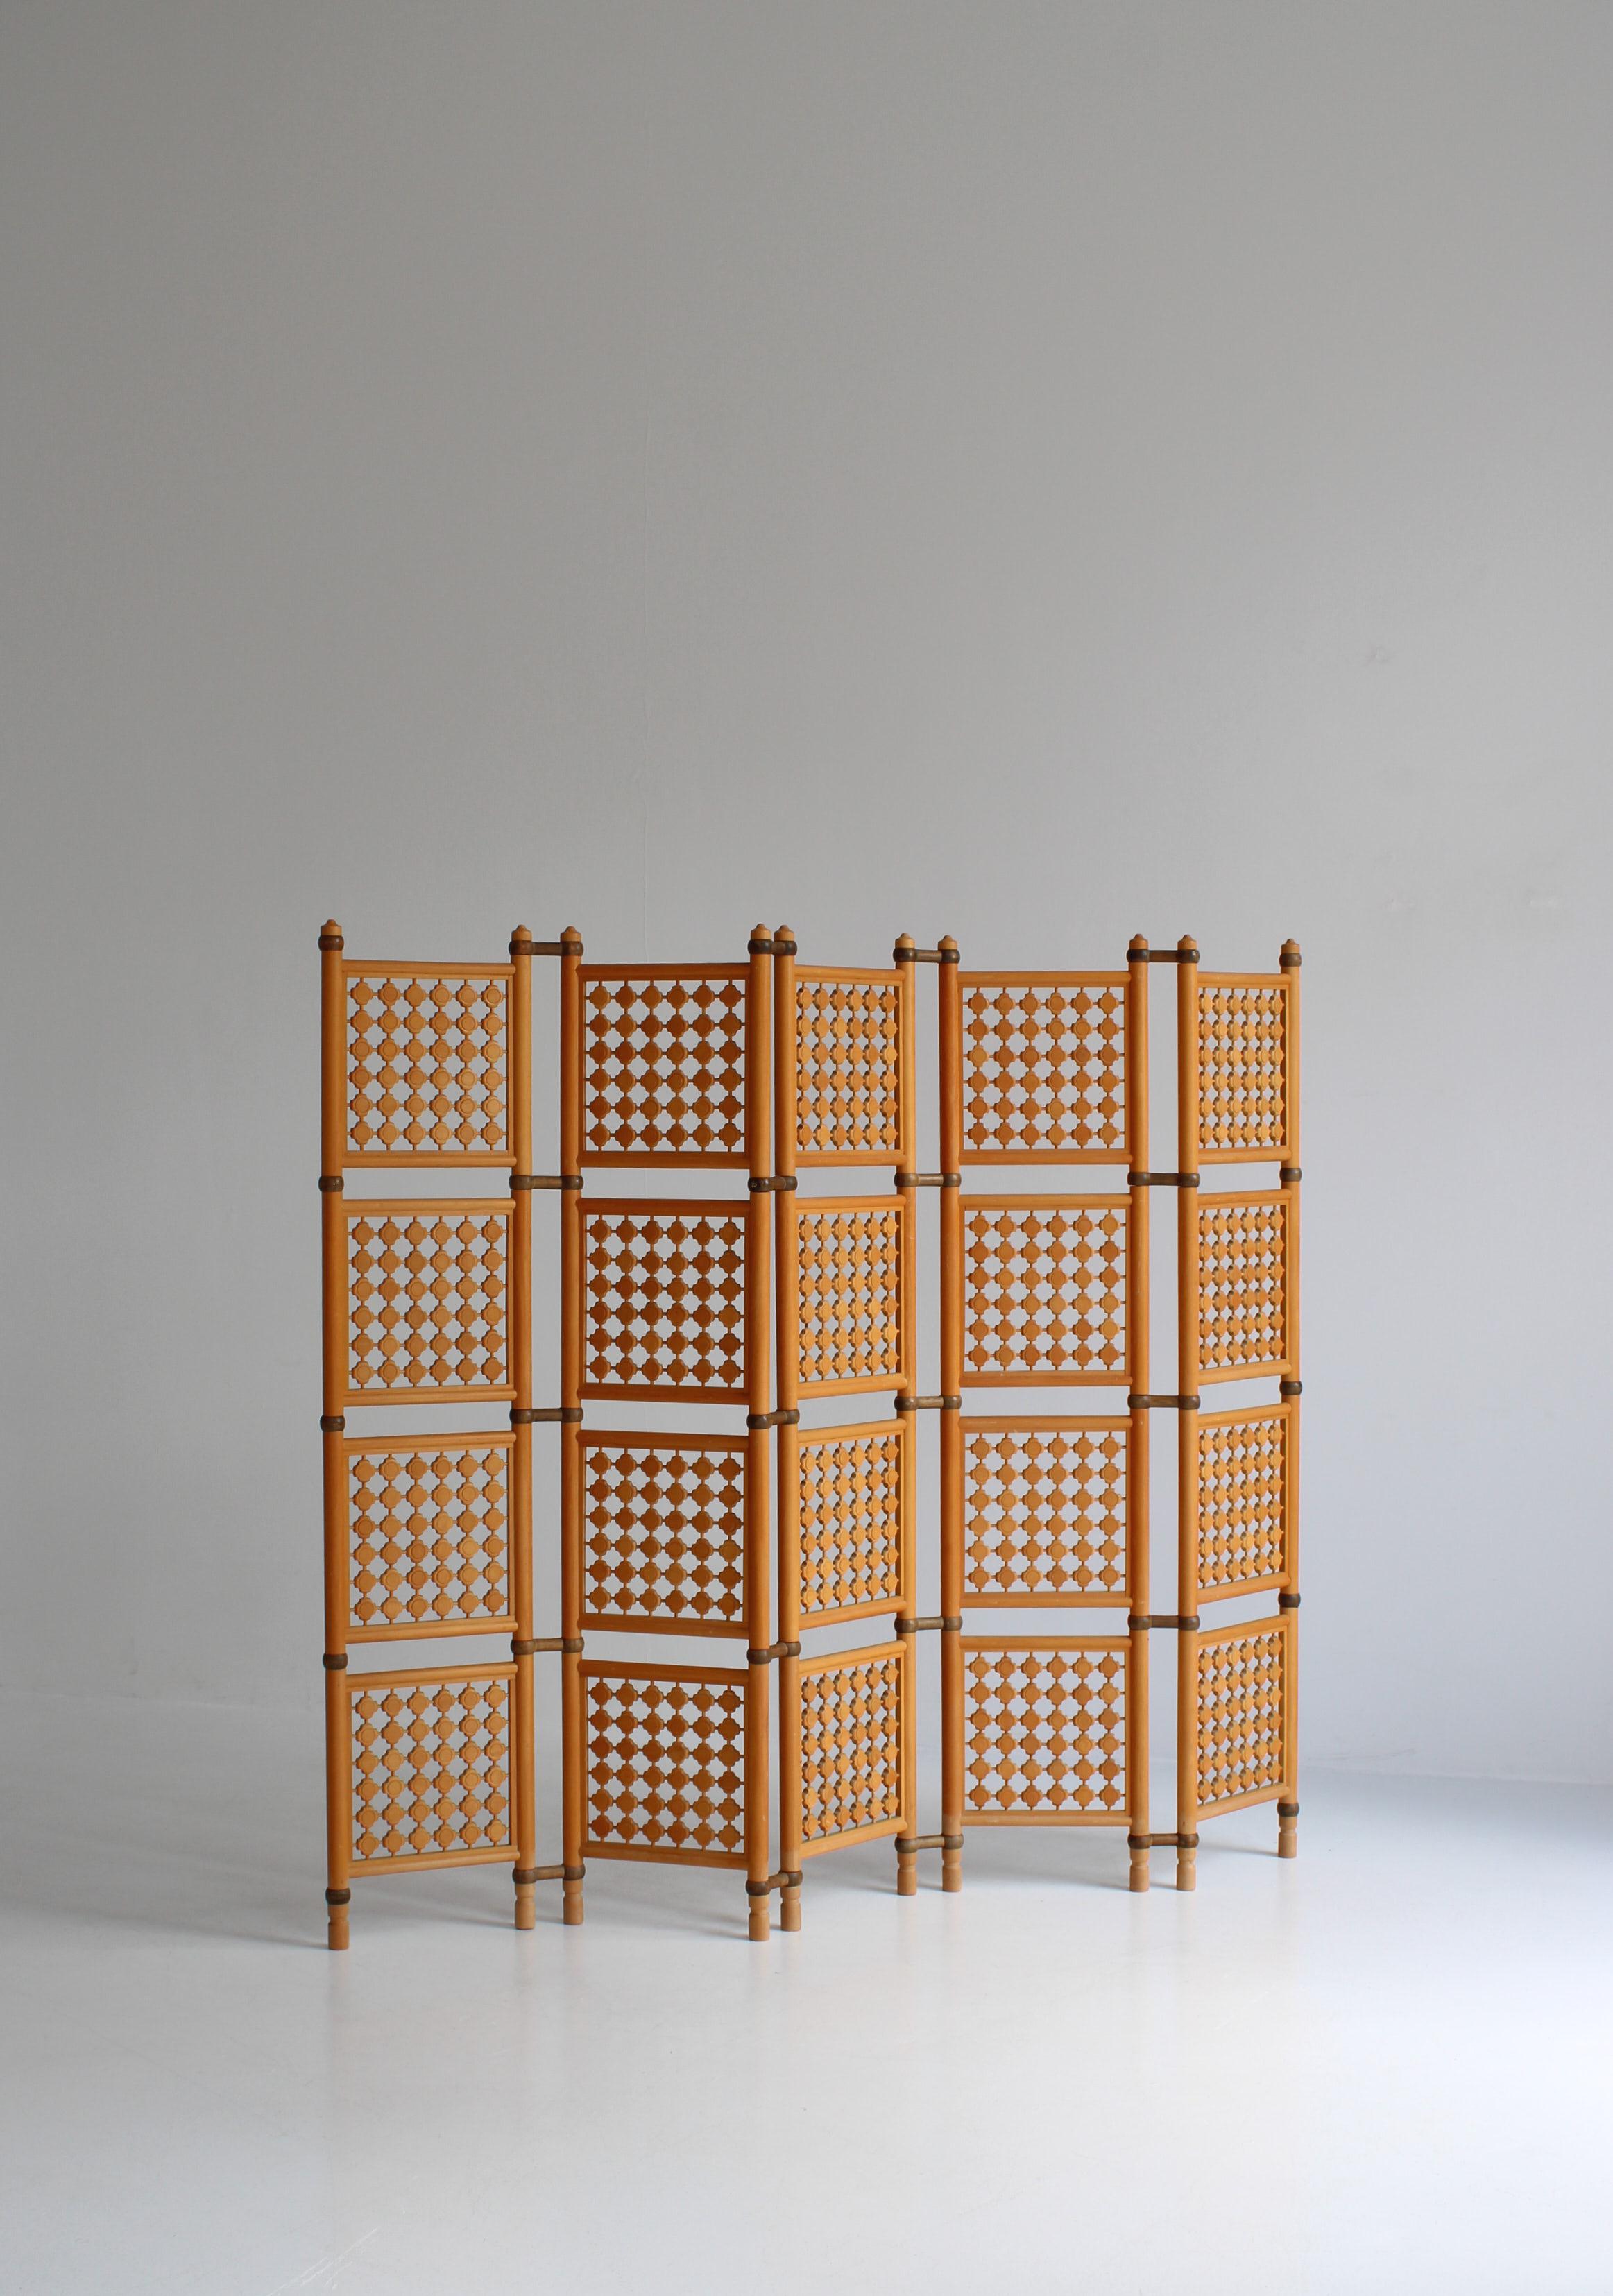 Set of Scandinavian Modern Screens or Room Dividers in Stained Beechwood, 1940s For Sale 5